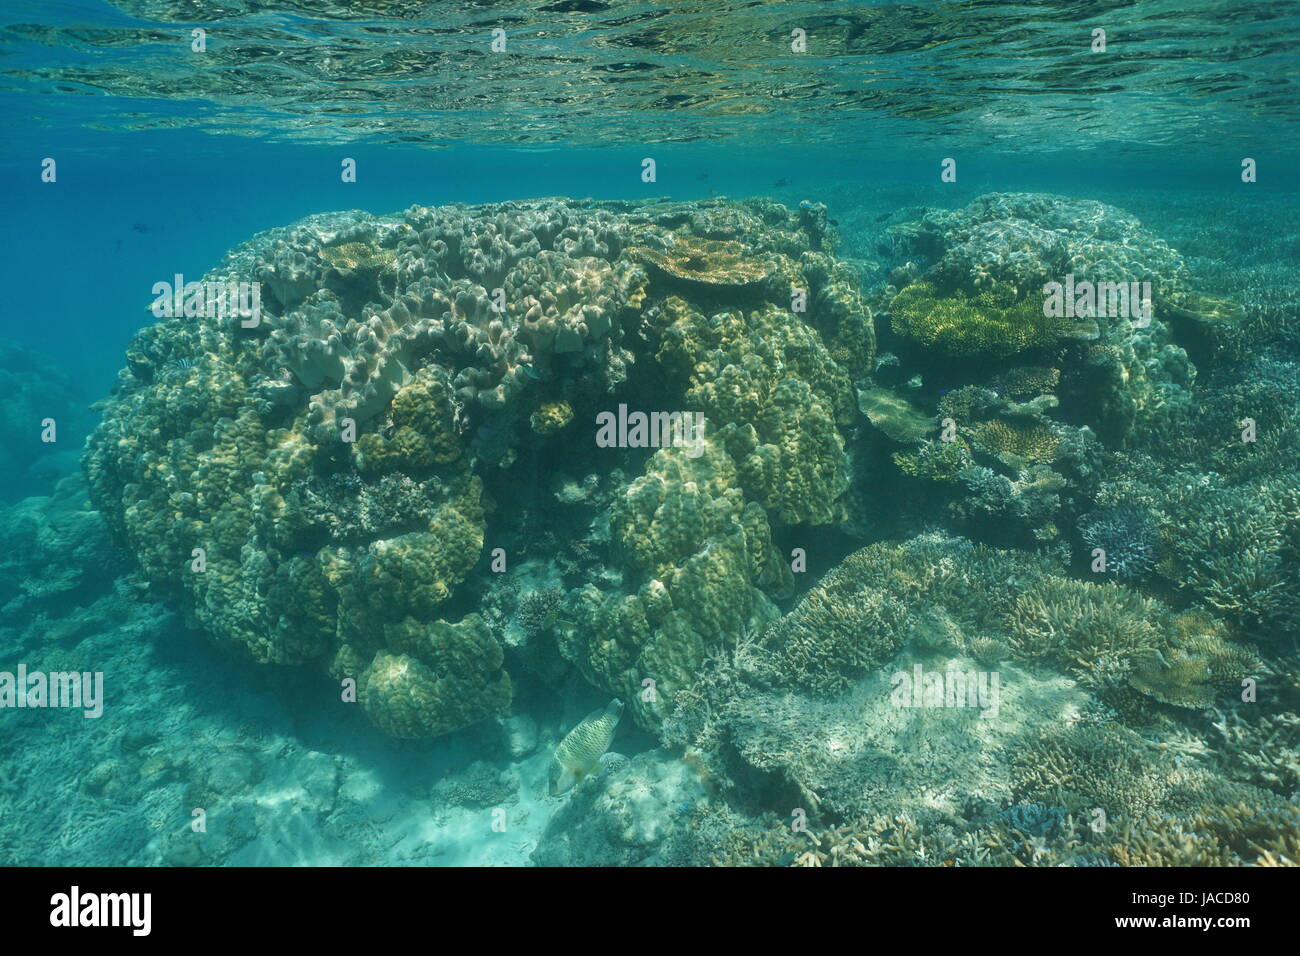 South Pacific ocean shallow underwater coral reef in the lagoon of Grande-Terre island, New Caledonia, Oceania Stock Photo